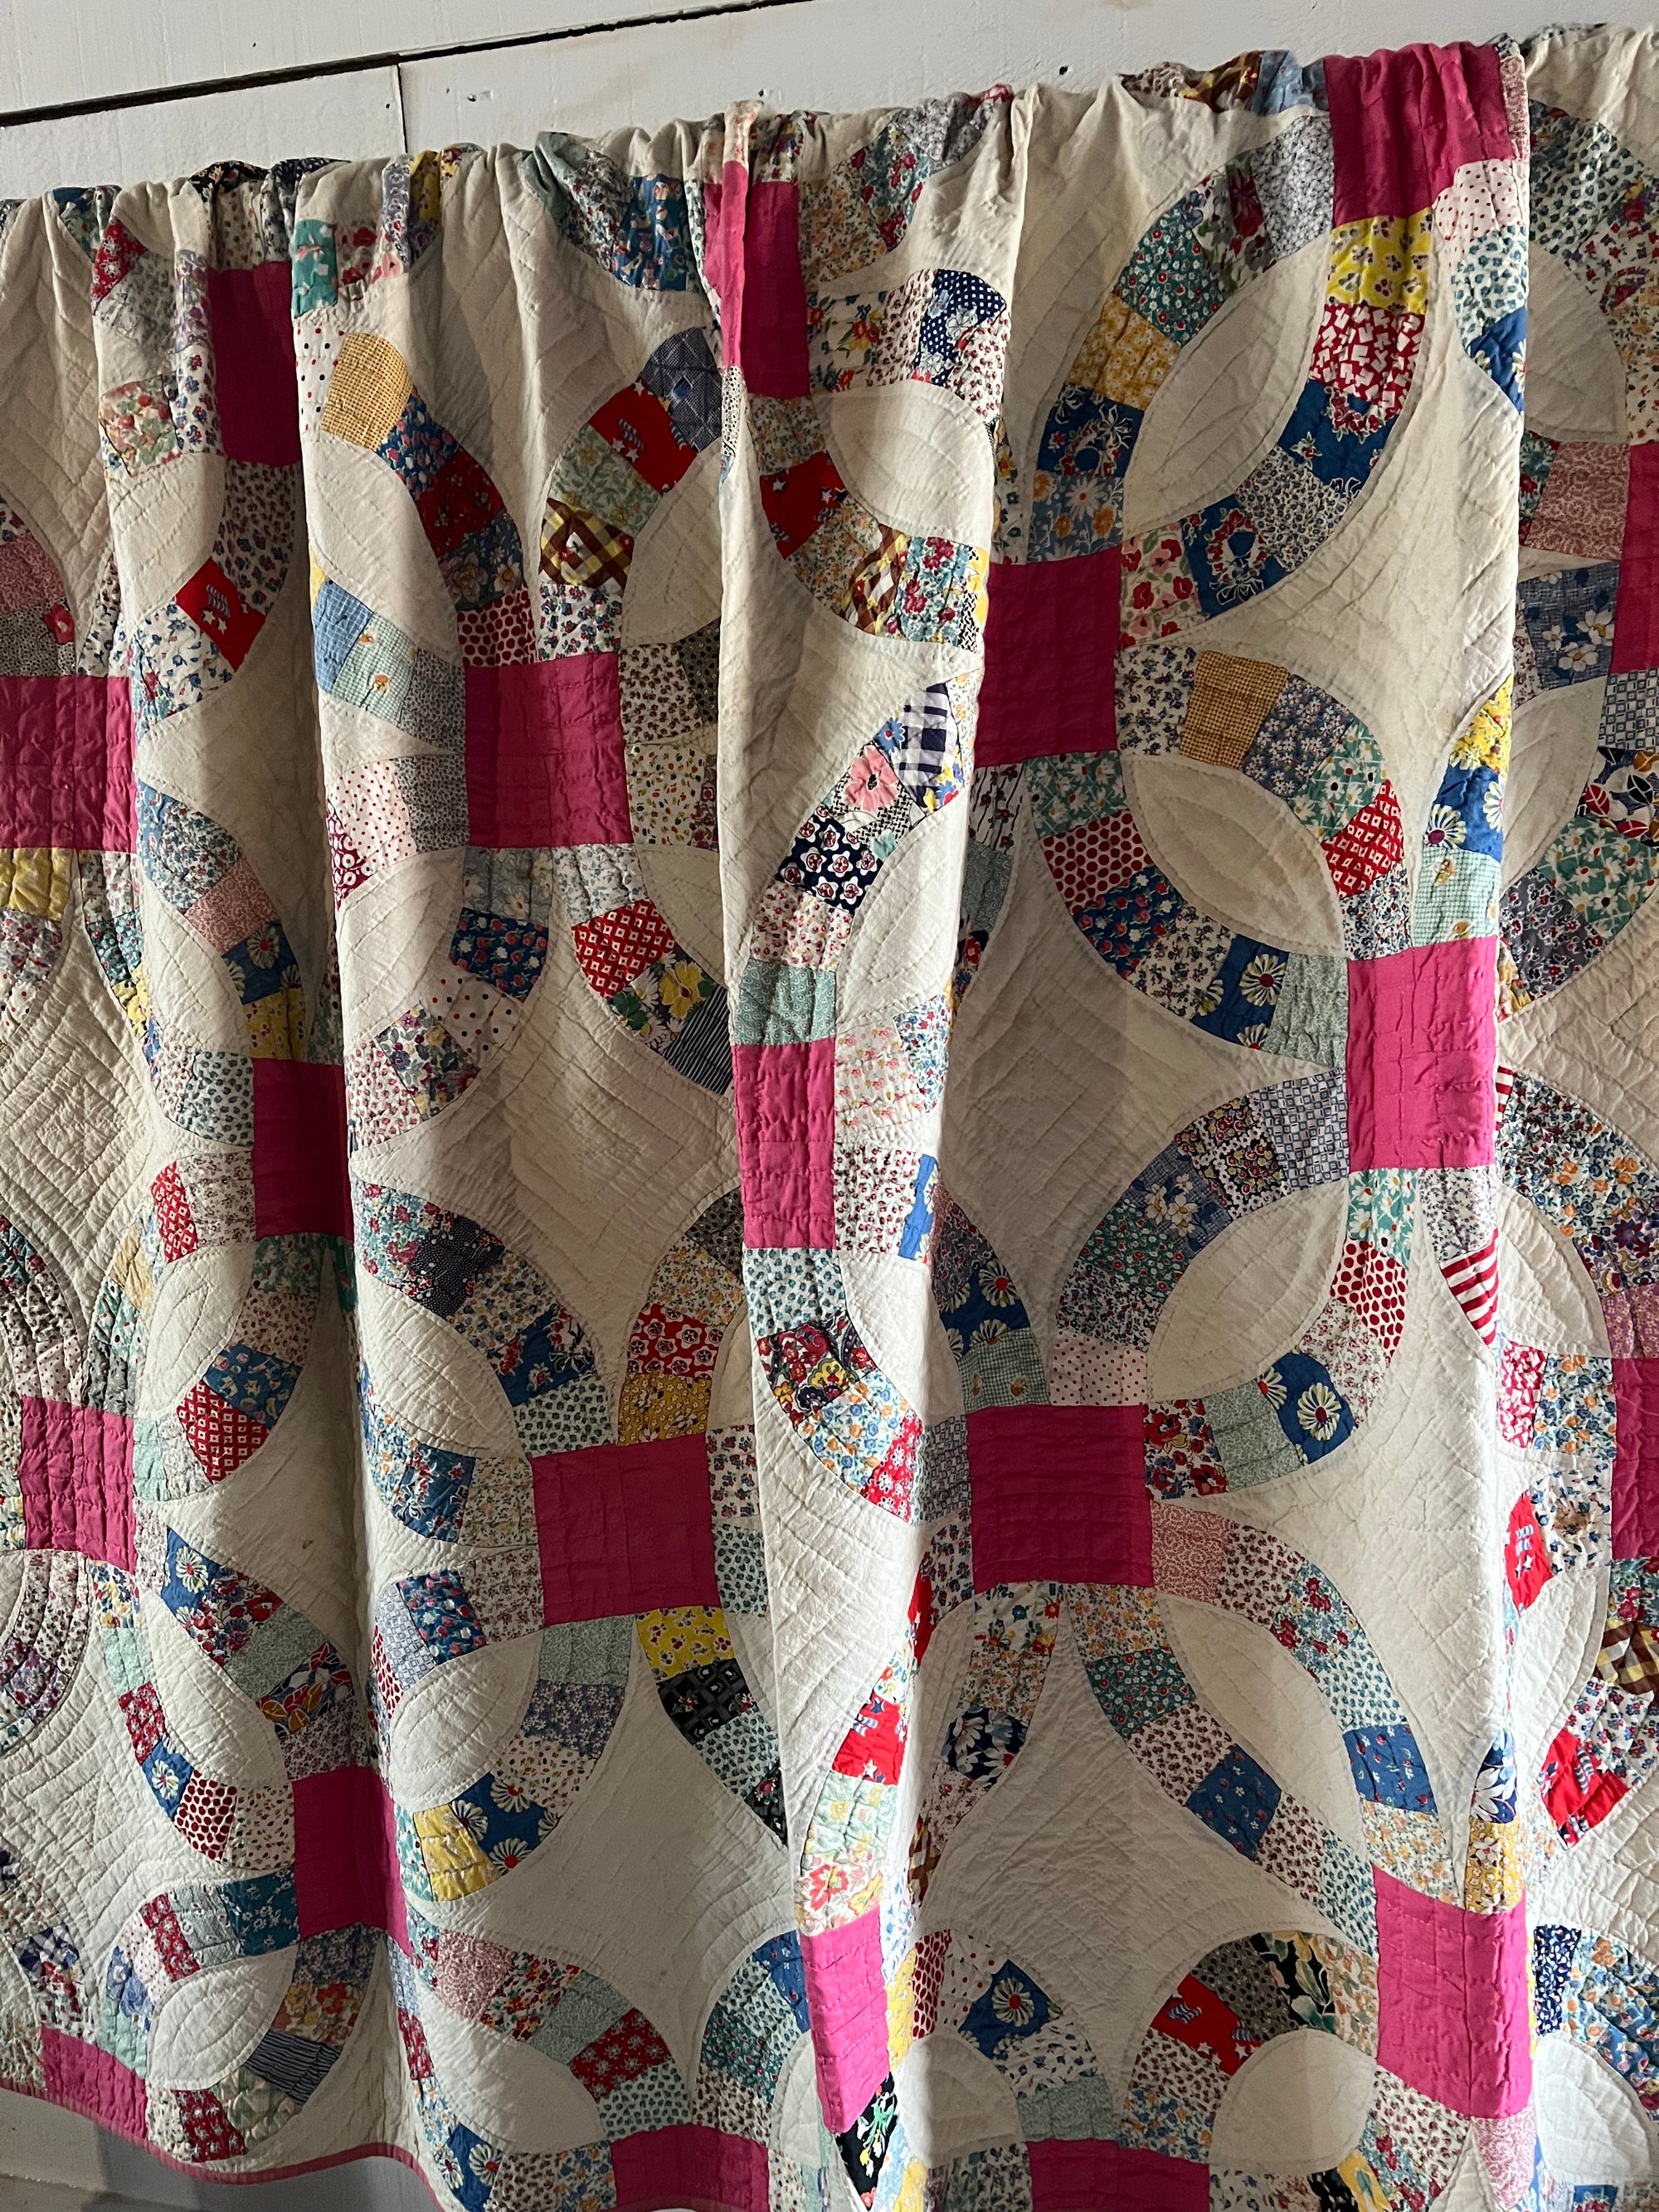 Quilted Patch Deadstock Cotton Shower Curtain